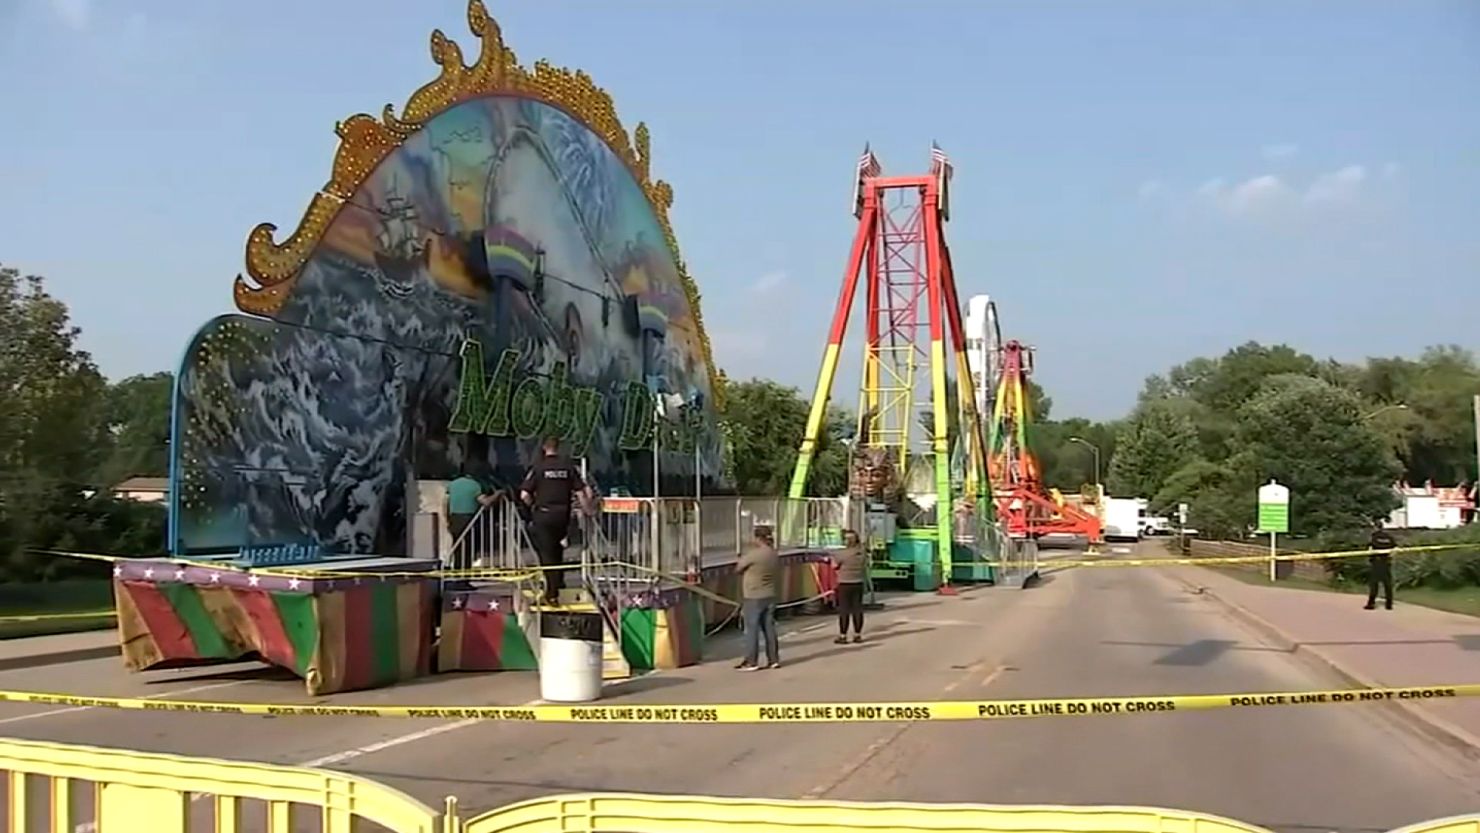 A child was injured after falling from a carnival ride in Antioch, Illinois, police said.